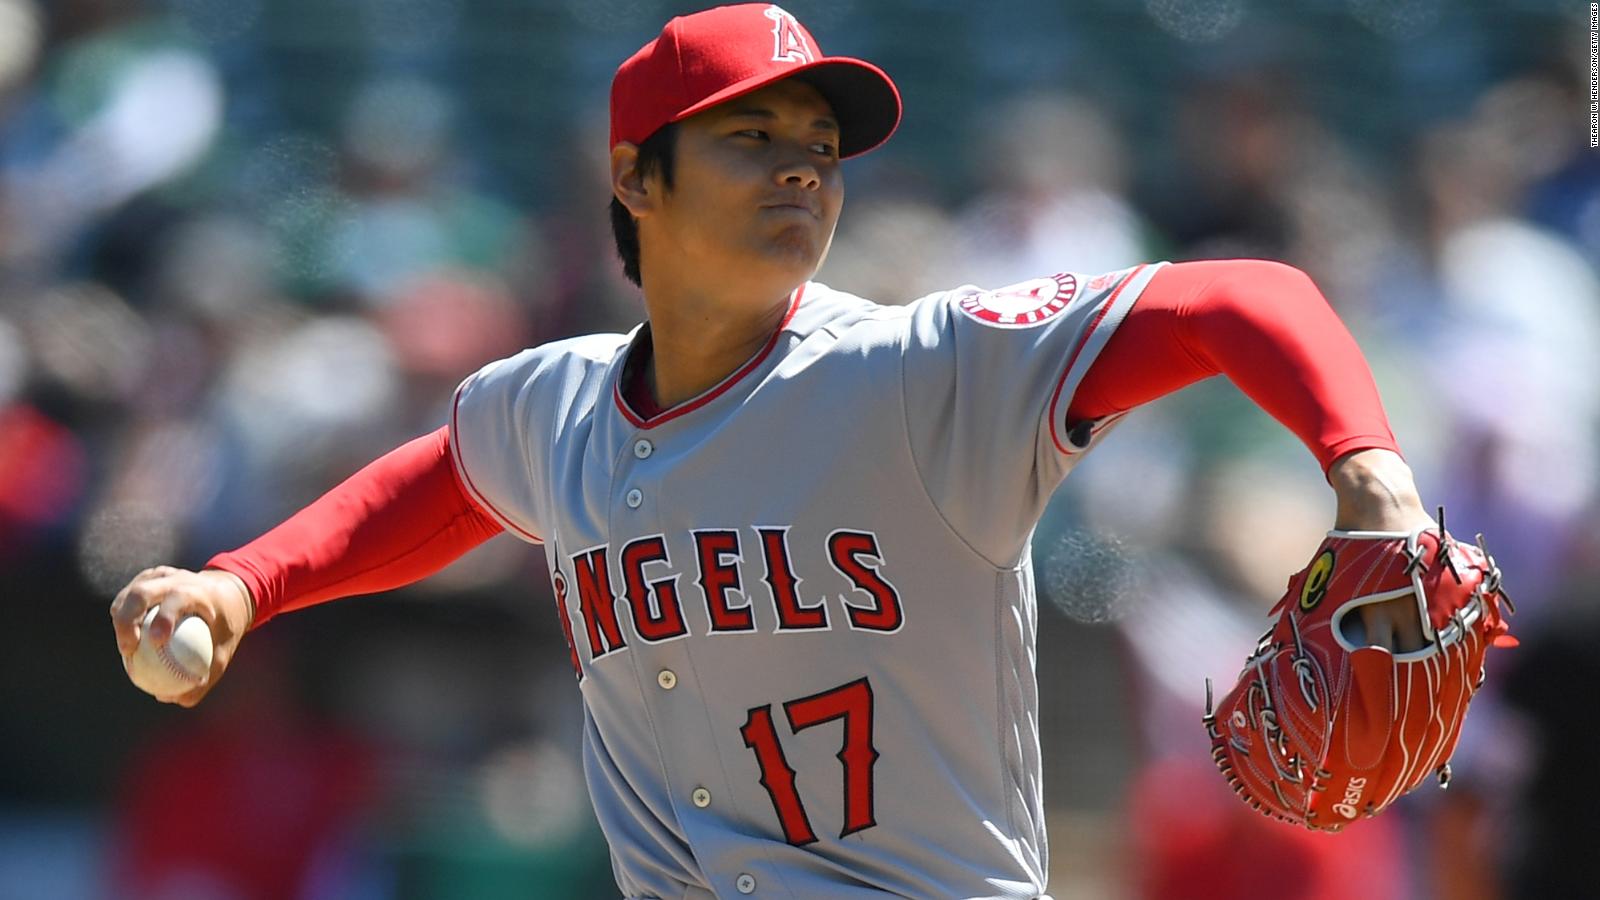 Shohei Ohtani delivers, wins MLB pitching debut CNN